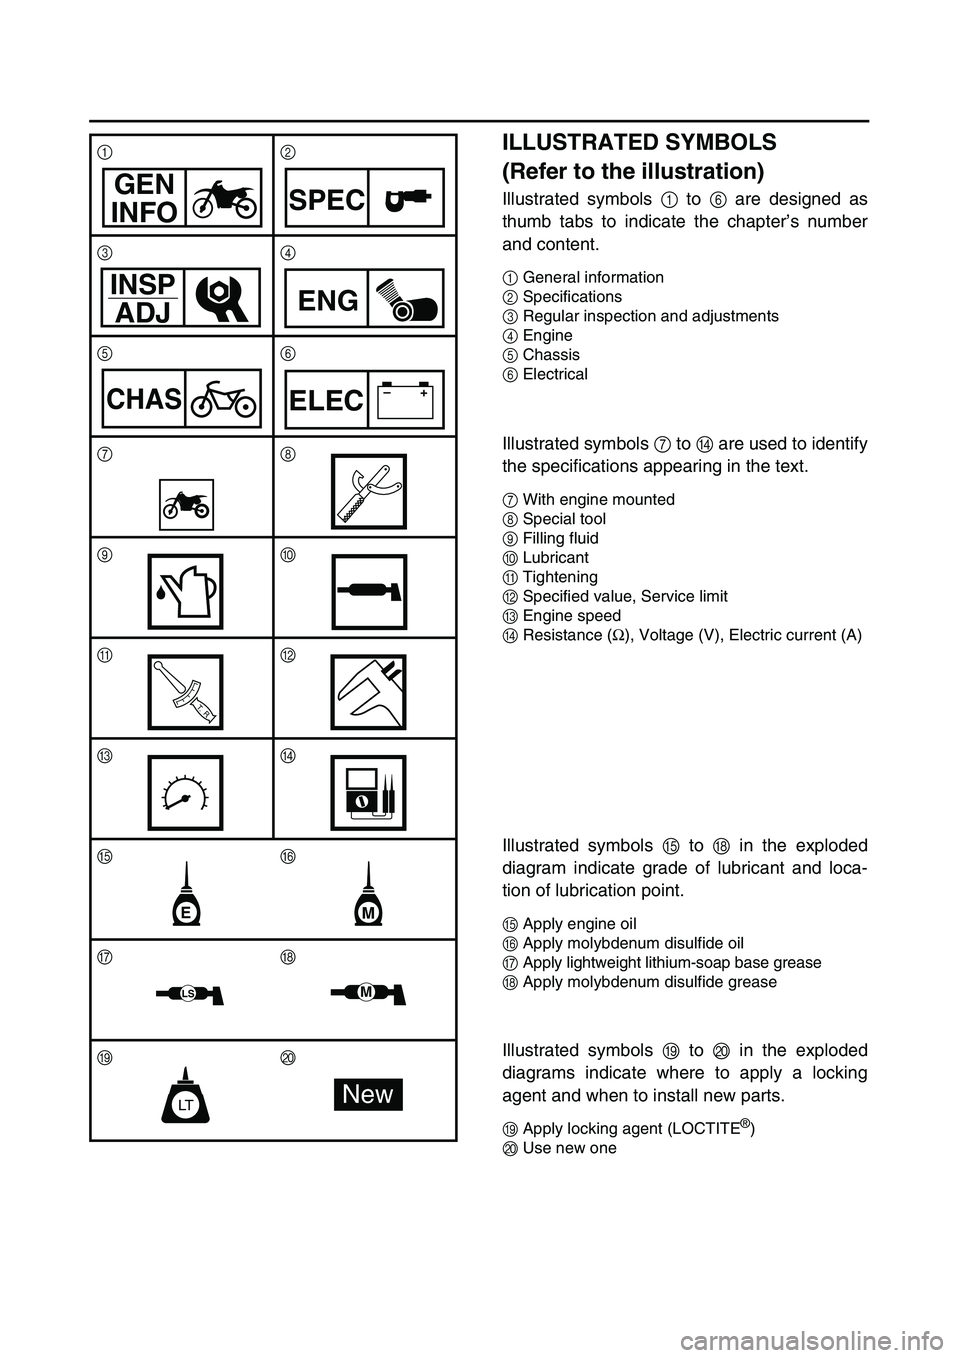 YAMAHA TTR90 2004  Owners Manual  
ILLUSTRATED SYMBOLS 
(Refer to the illustration) 
Illustrated symbols  
1  
 to   
6  
 are designed as
thumb tabs to indicate the chapter’s number
and content. 
1 
General information 
2 
Specifi